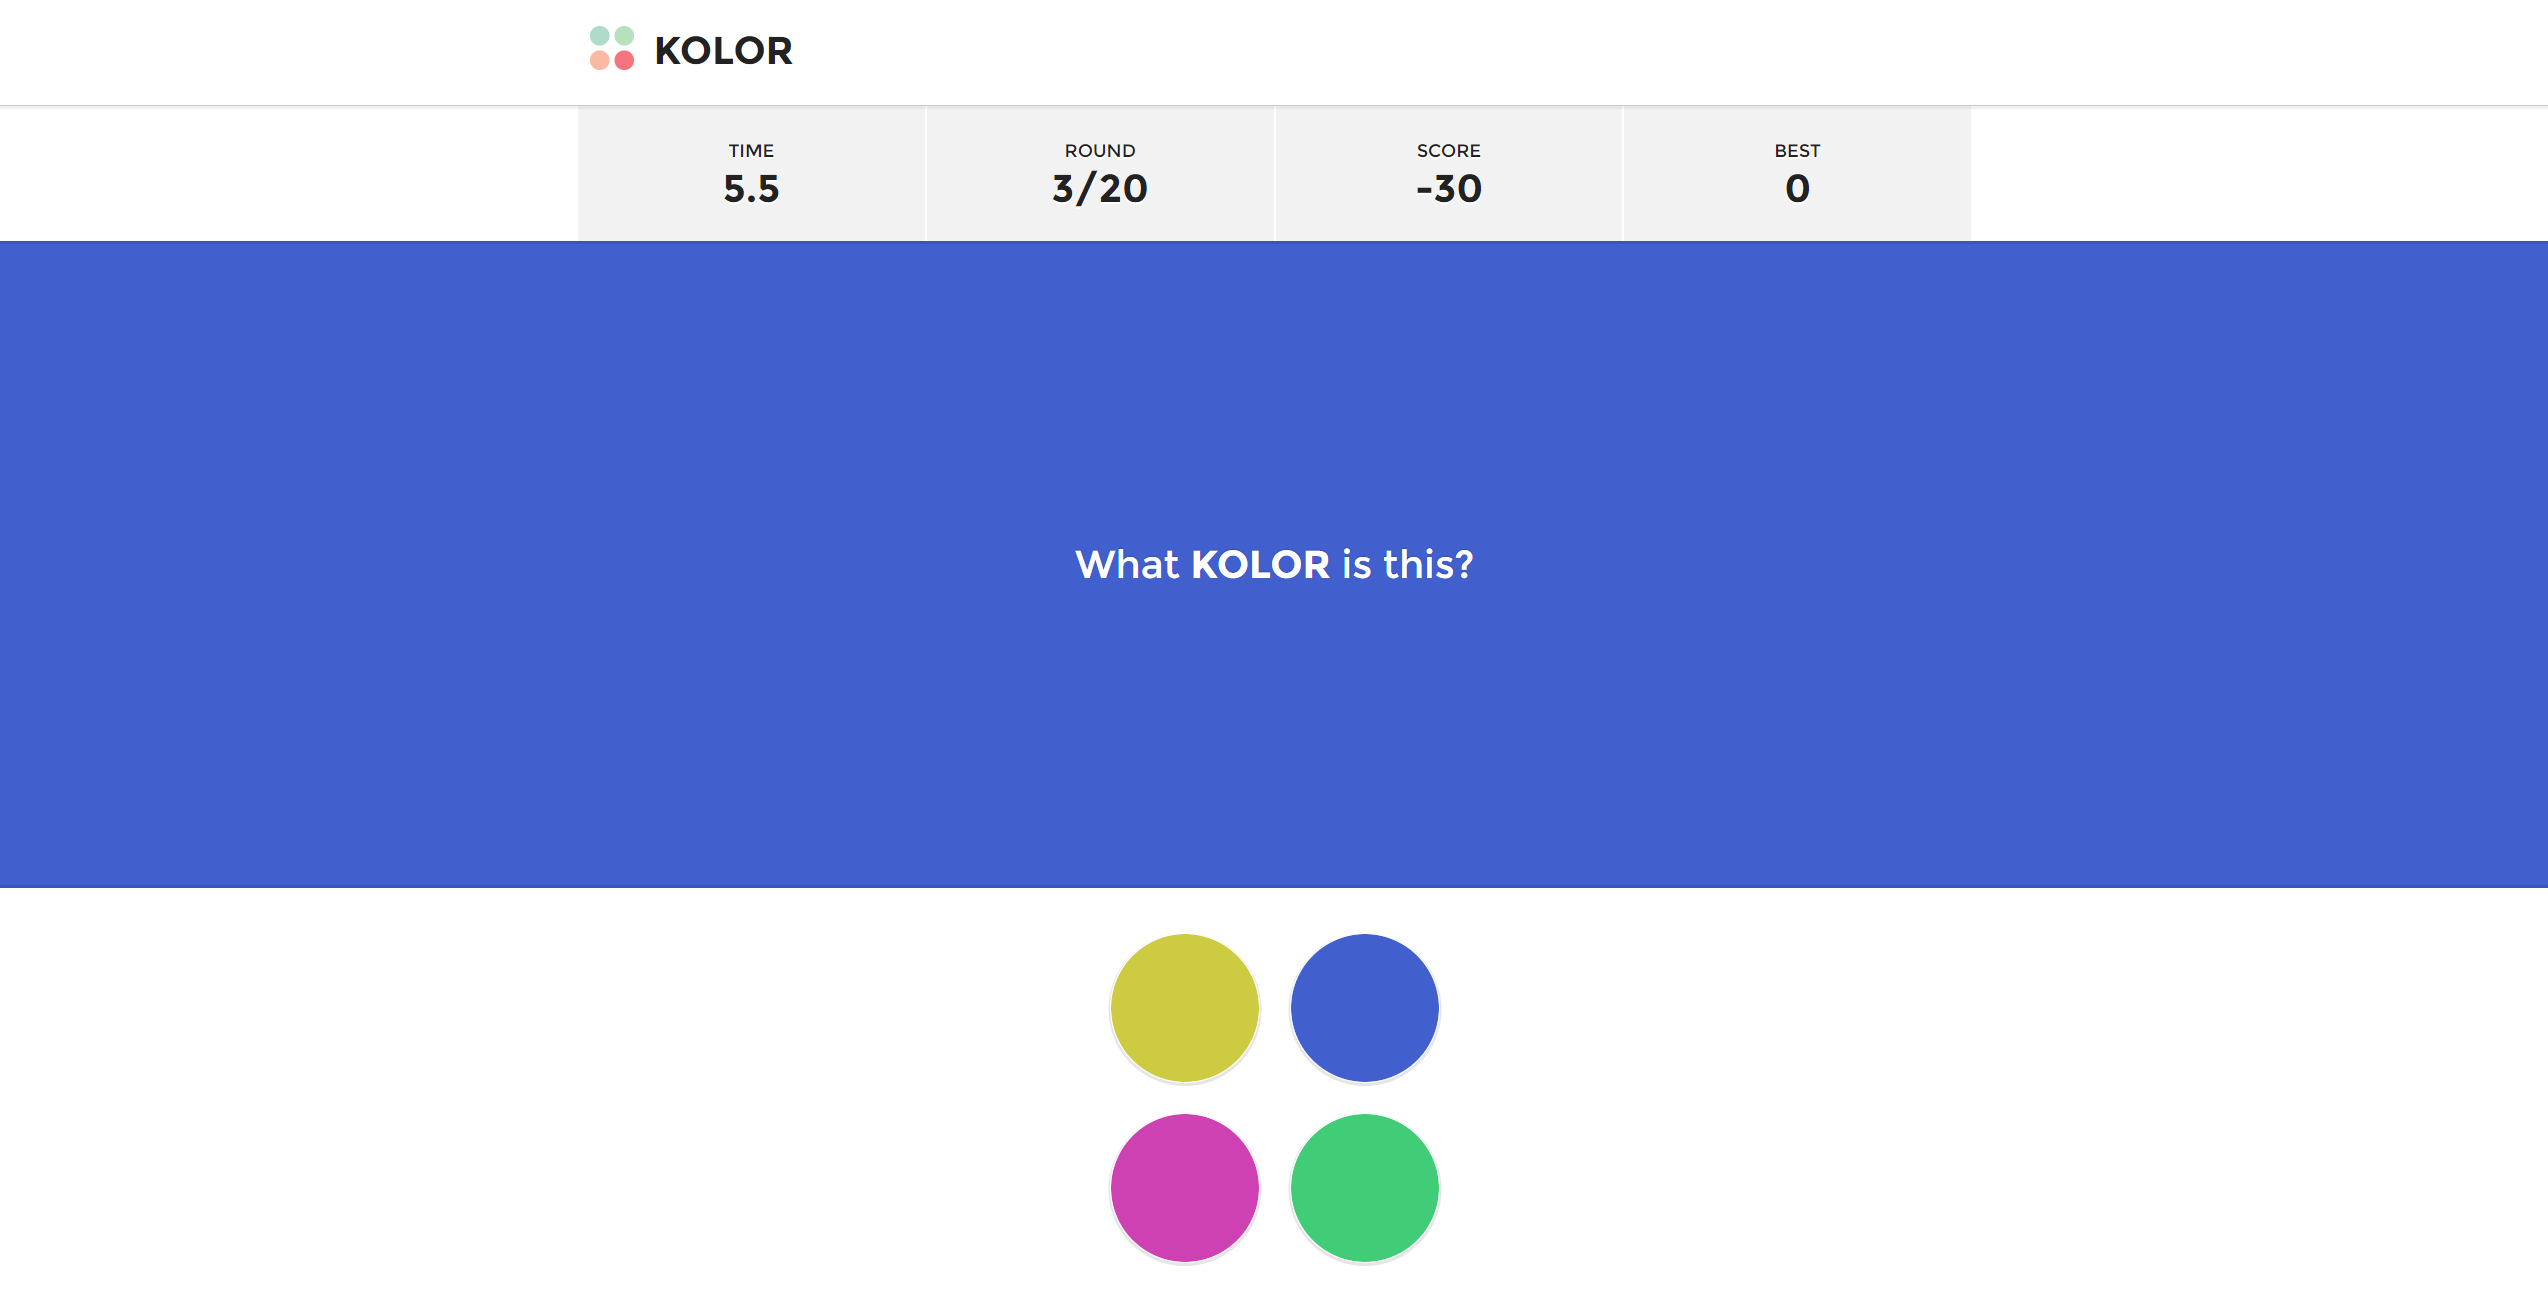 A fast paced color guessing game